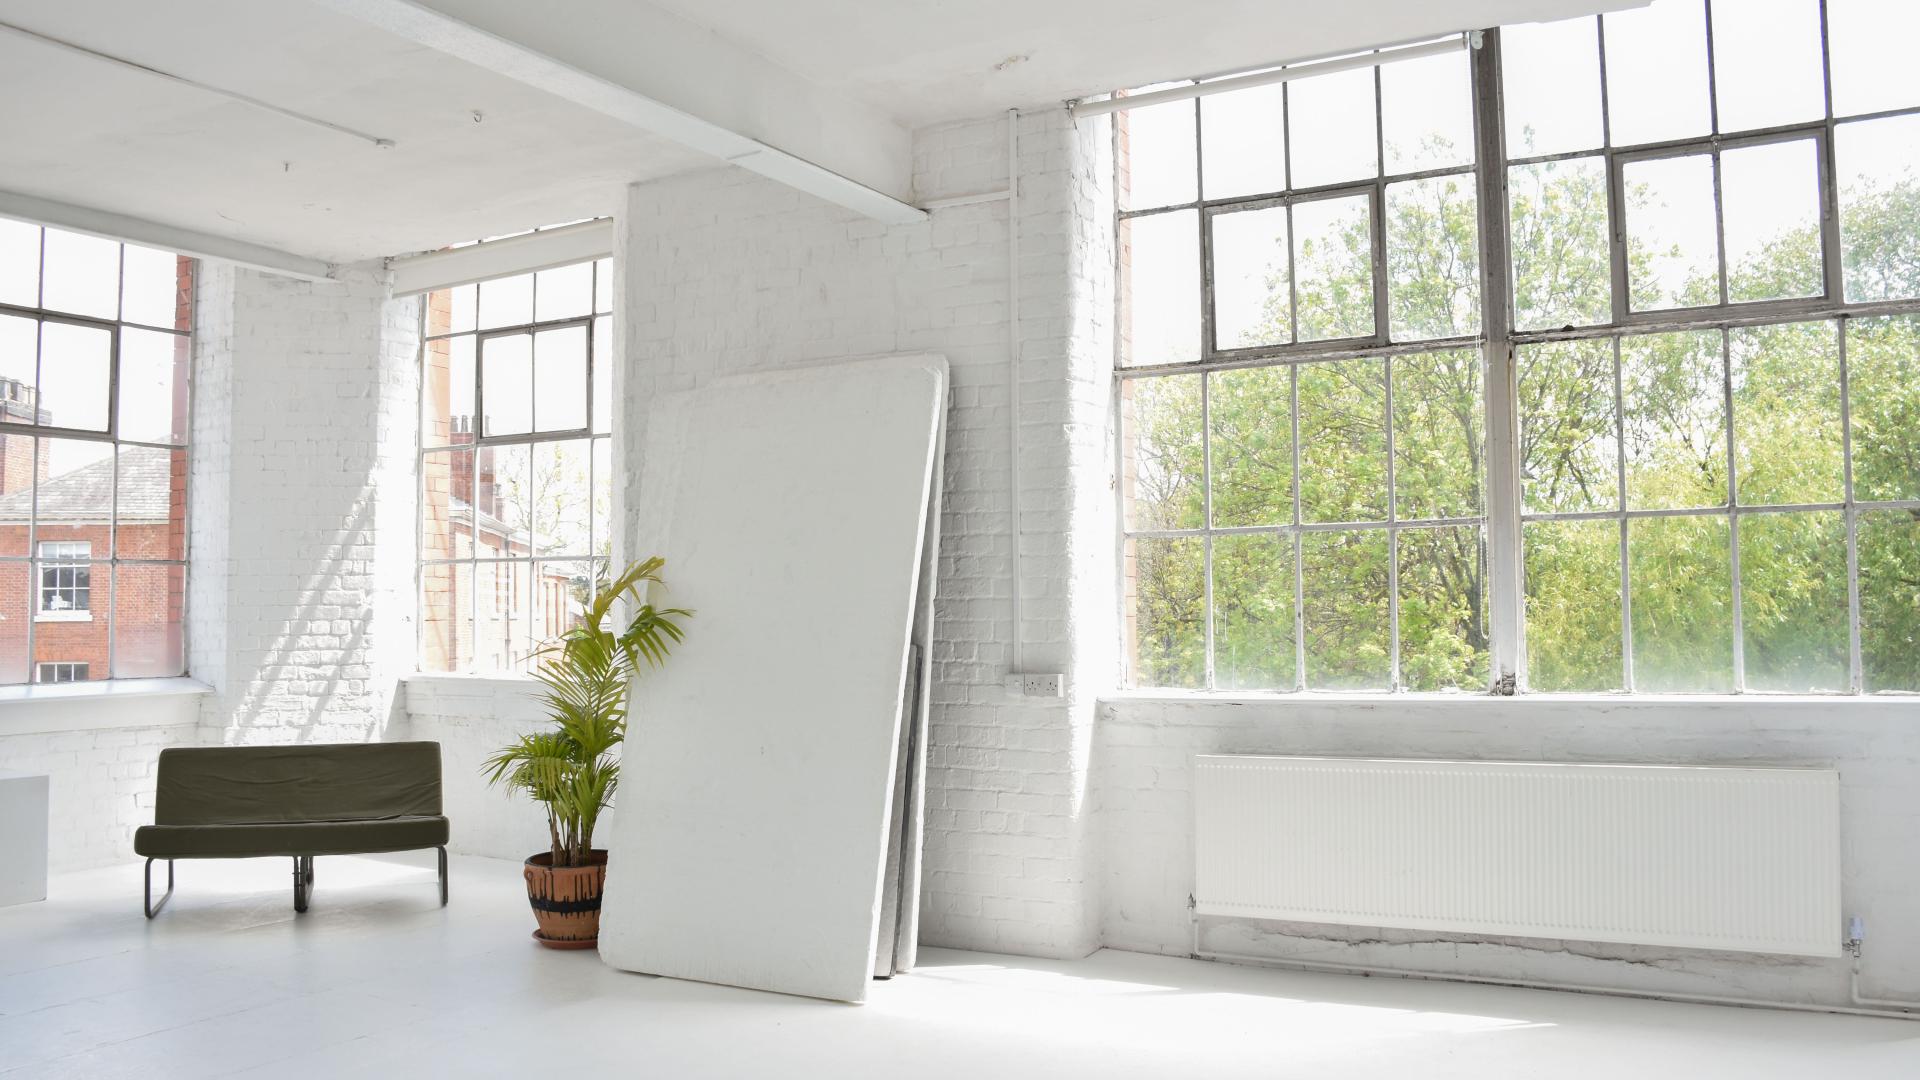 Art Studios for Hire in Manchester